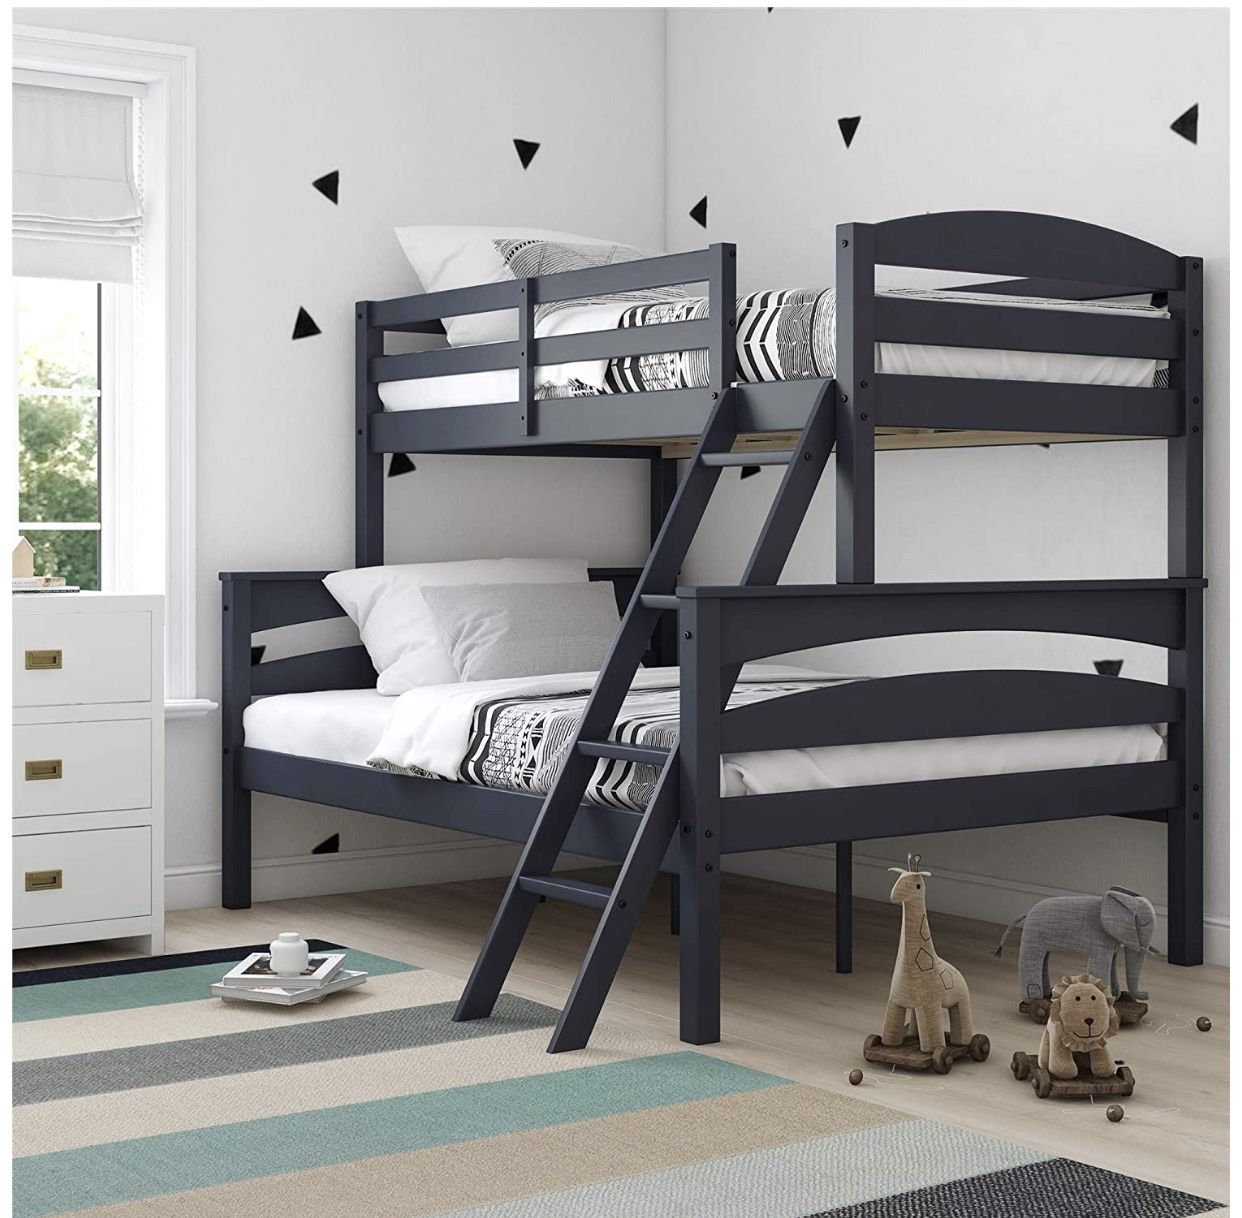 Bunk bed twin full size solid wood mattresses included